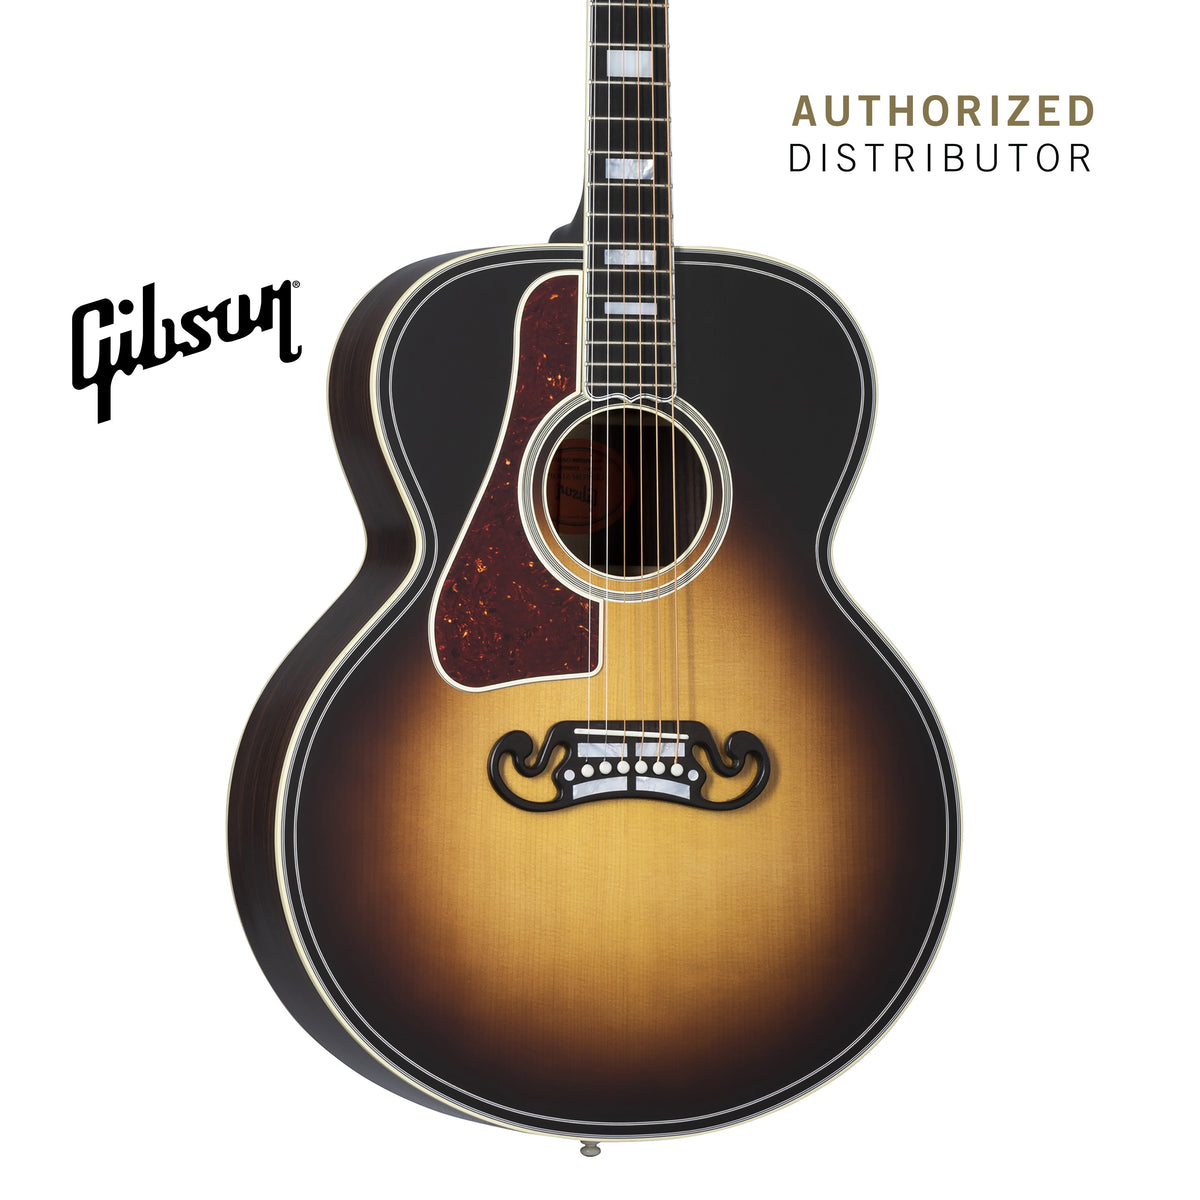 GIBSON SJ-200 WESTERN CLASSIC LEFT-HANDED ACOUSTIC GUITAR - VINTAGE SU